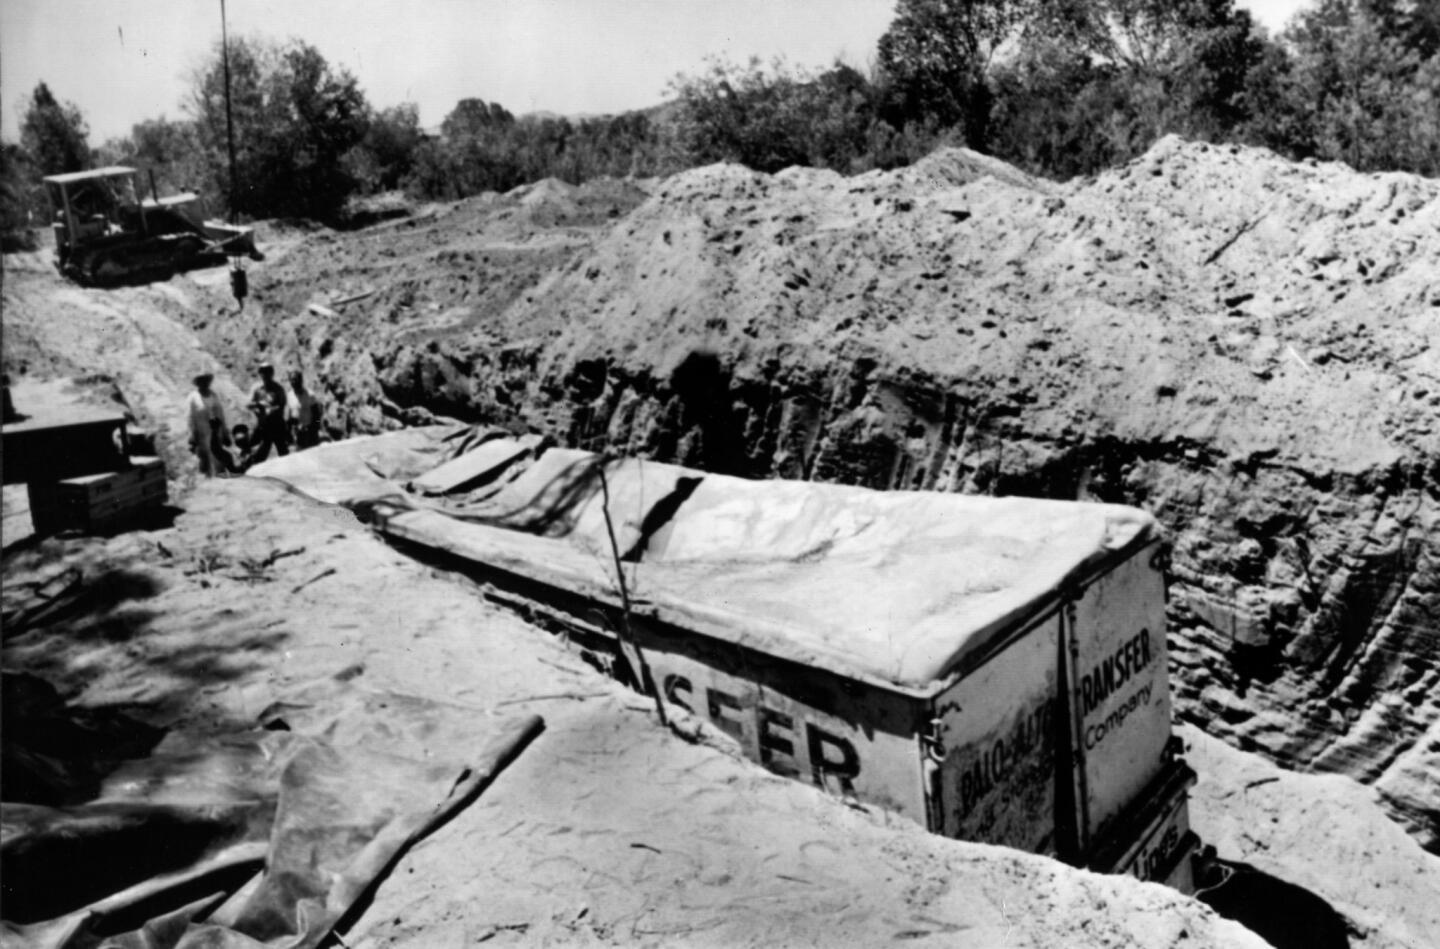 The moving van was buried at the Livermore quarry, about 100 miles from where the hostages had been taken in Chowchilla. This photo was published July 20, 1976.